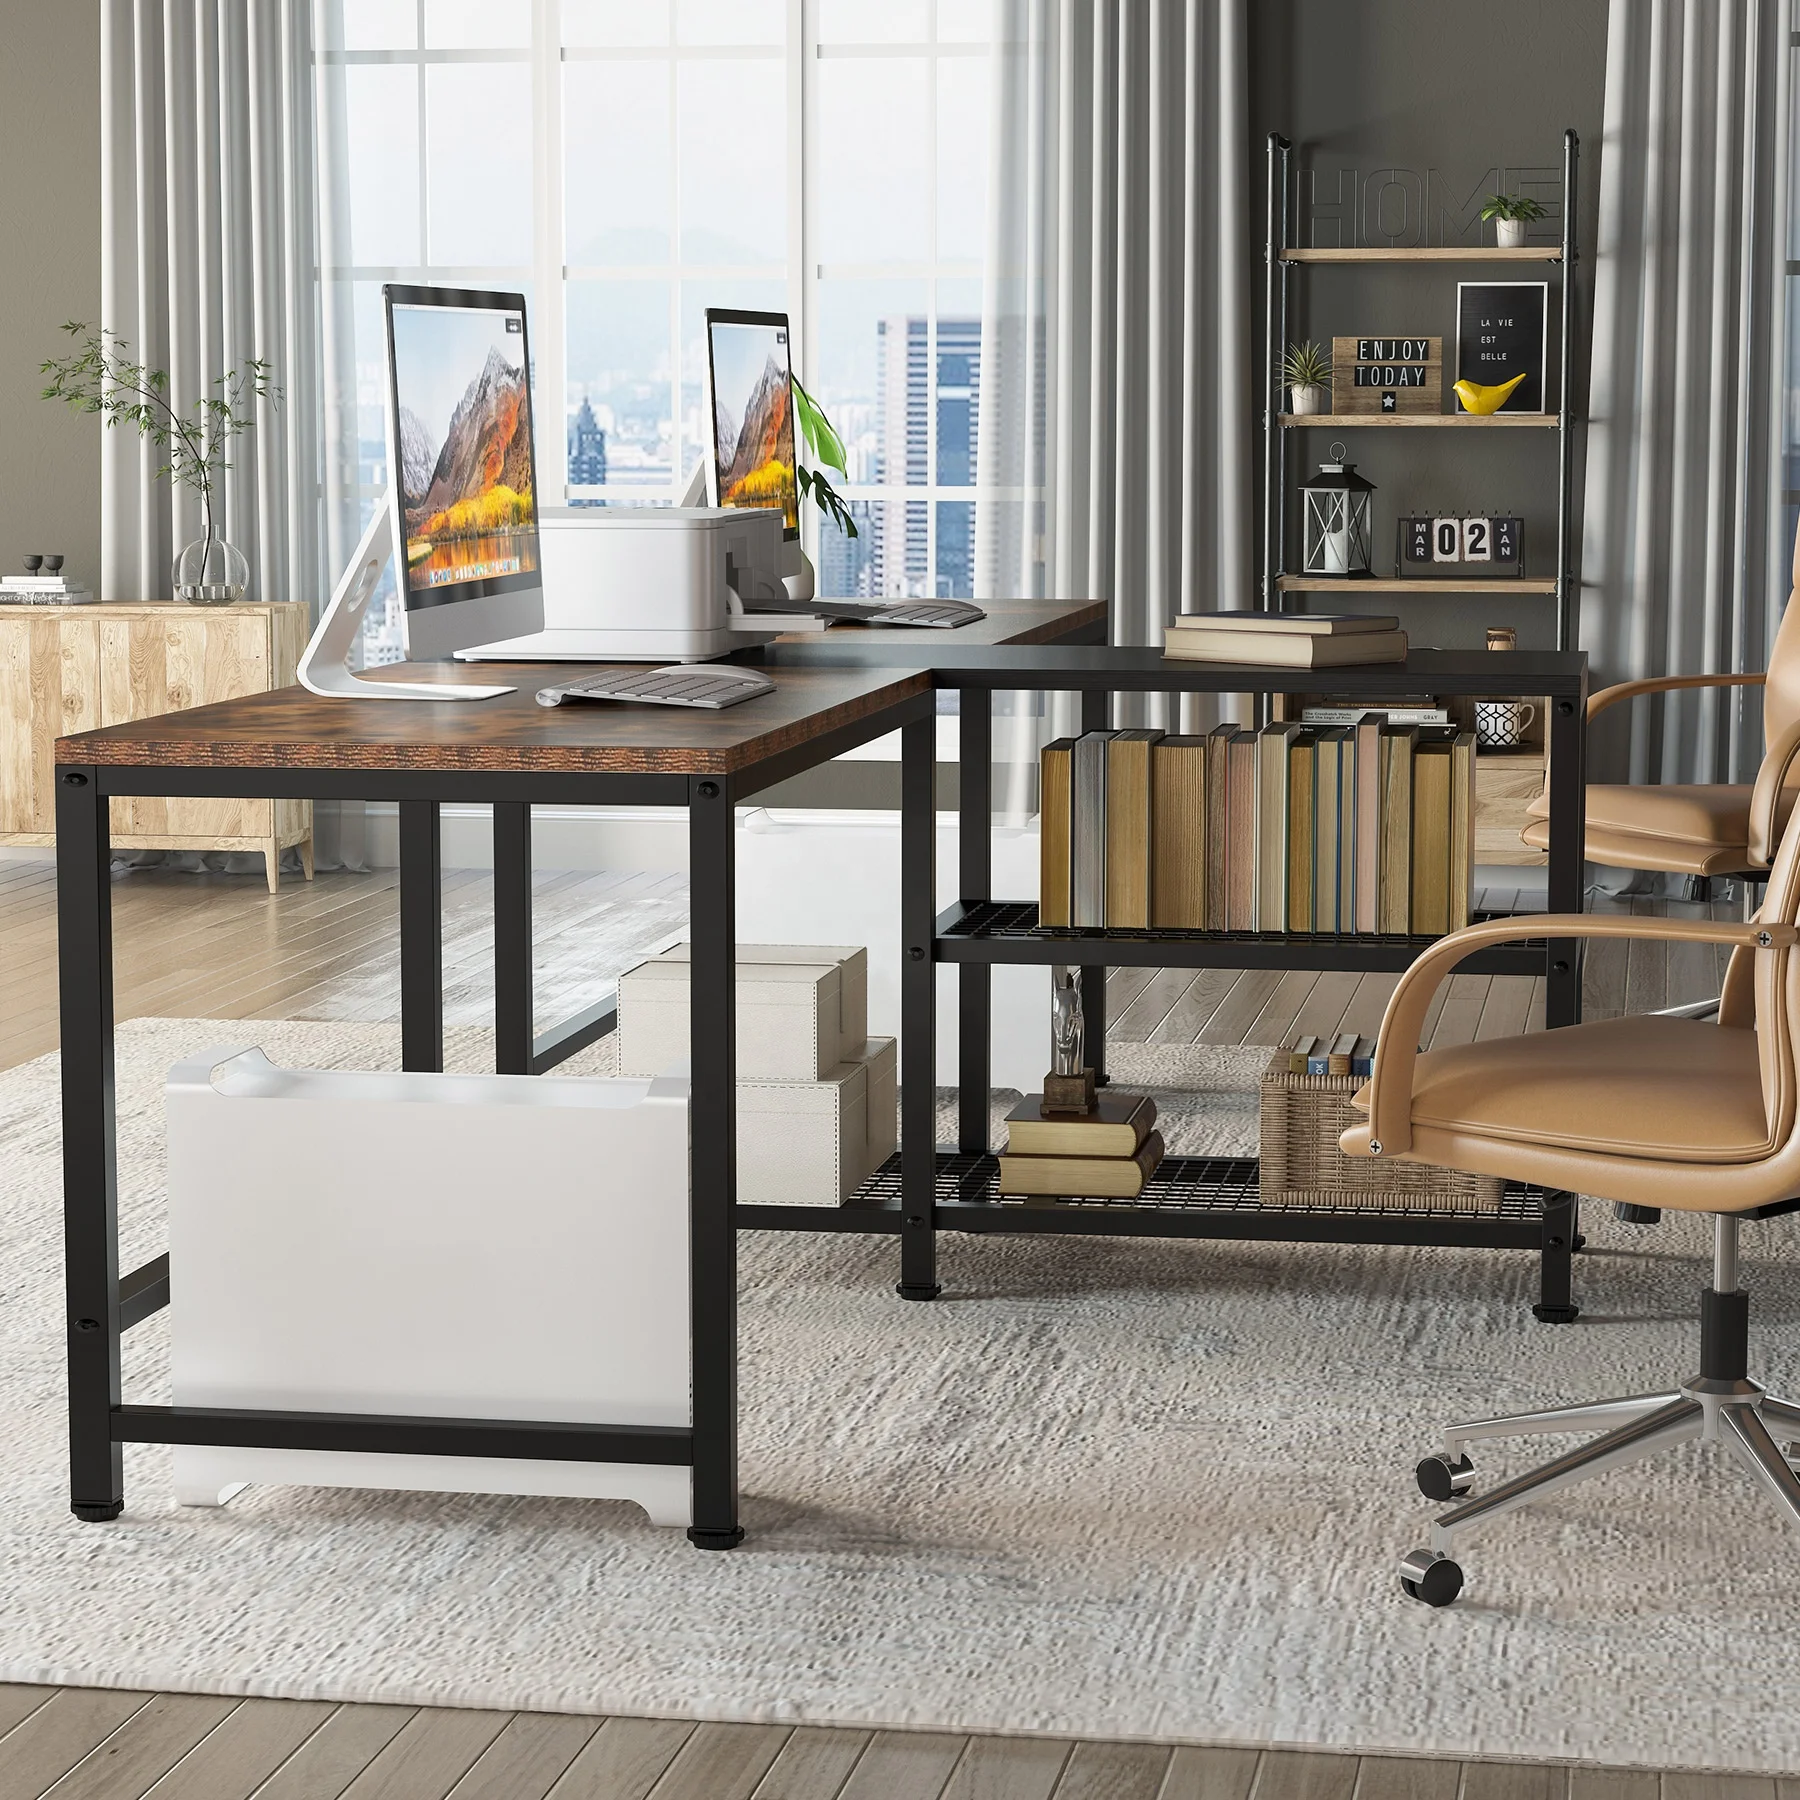 Home Corner Office Executive wide two person Computer work table Desk with Headphone Hook and Monitor Shelf